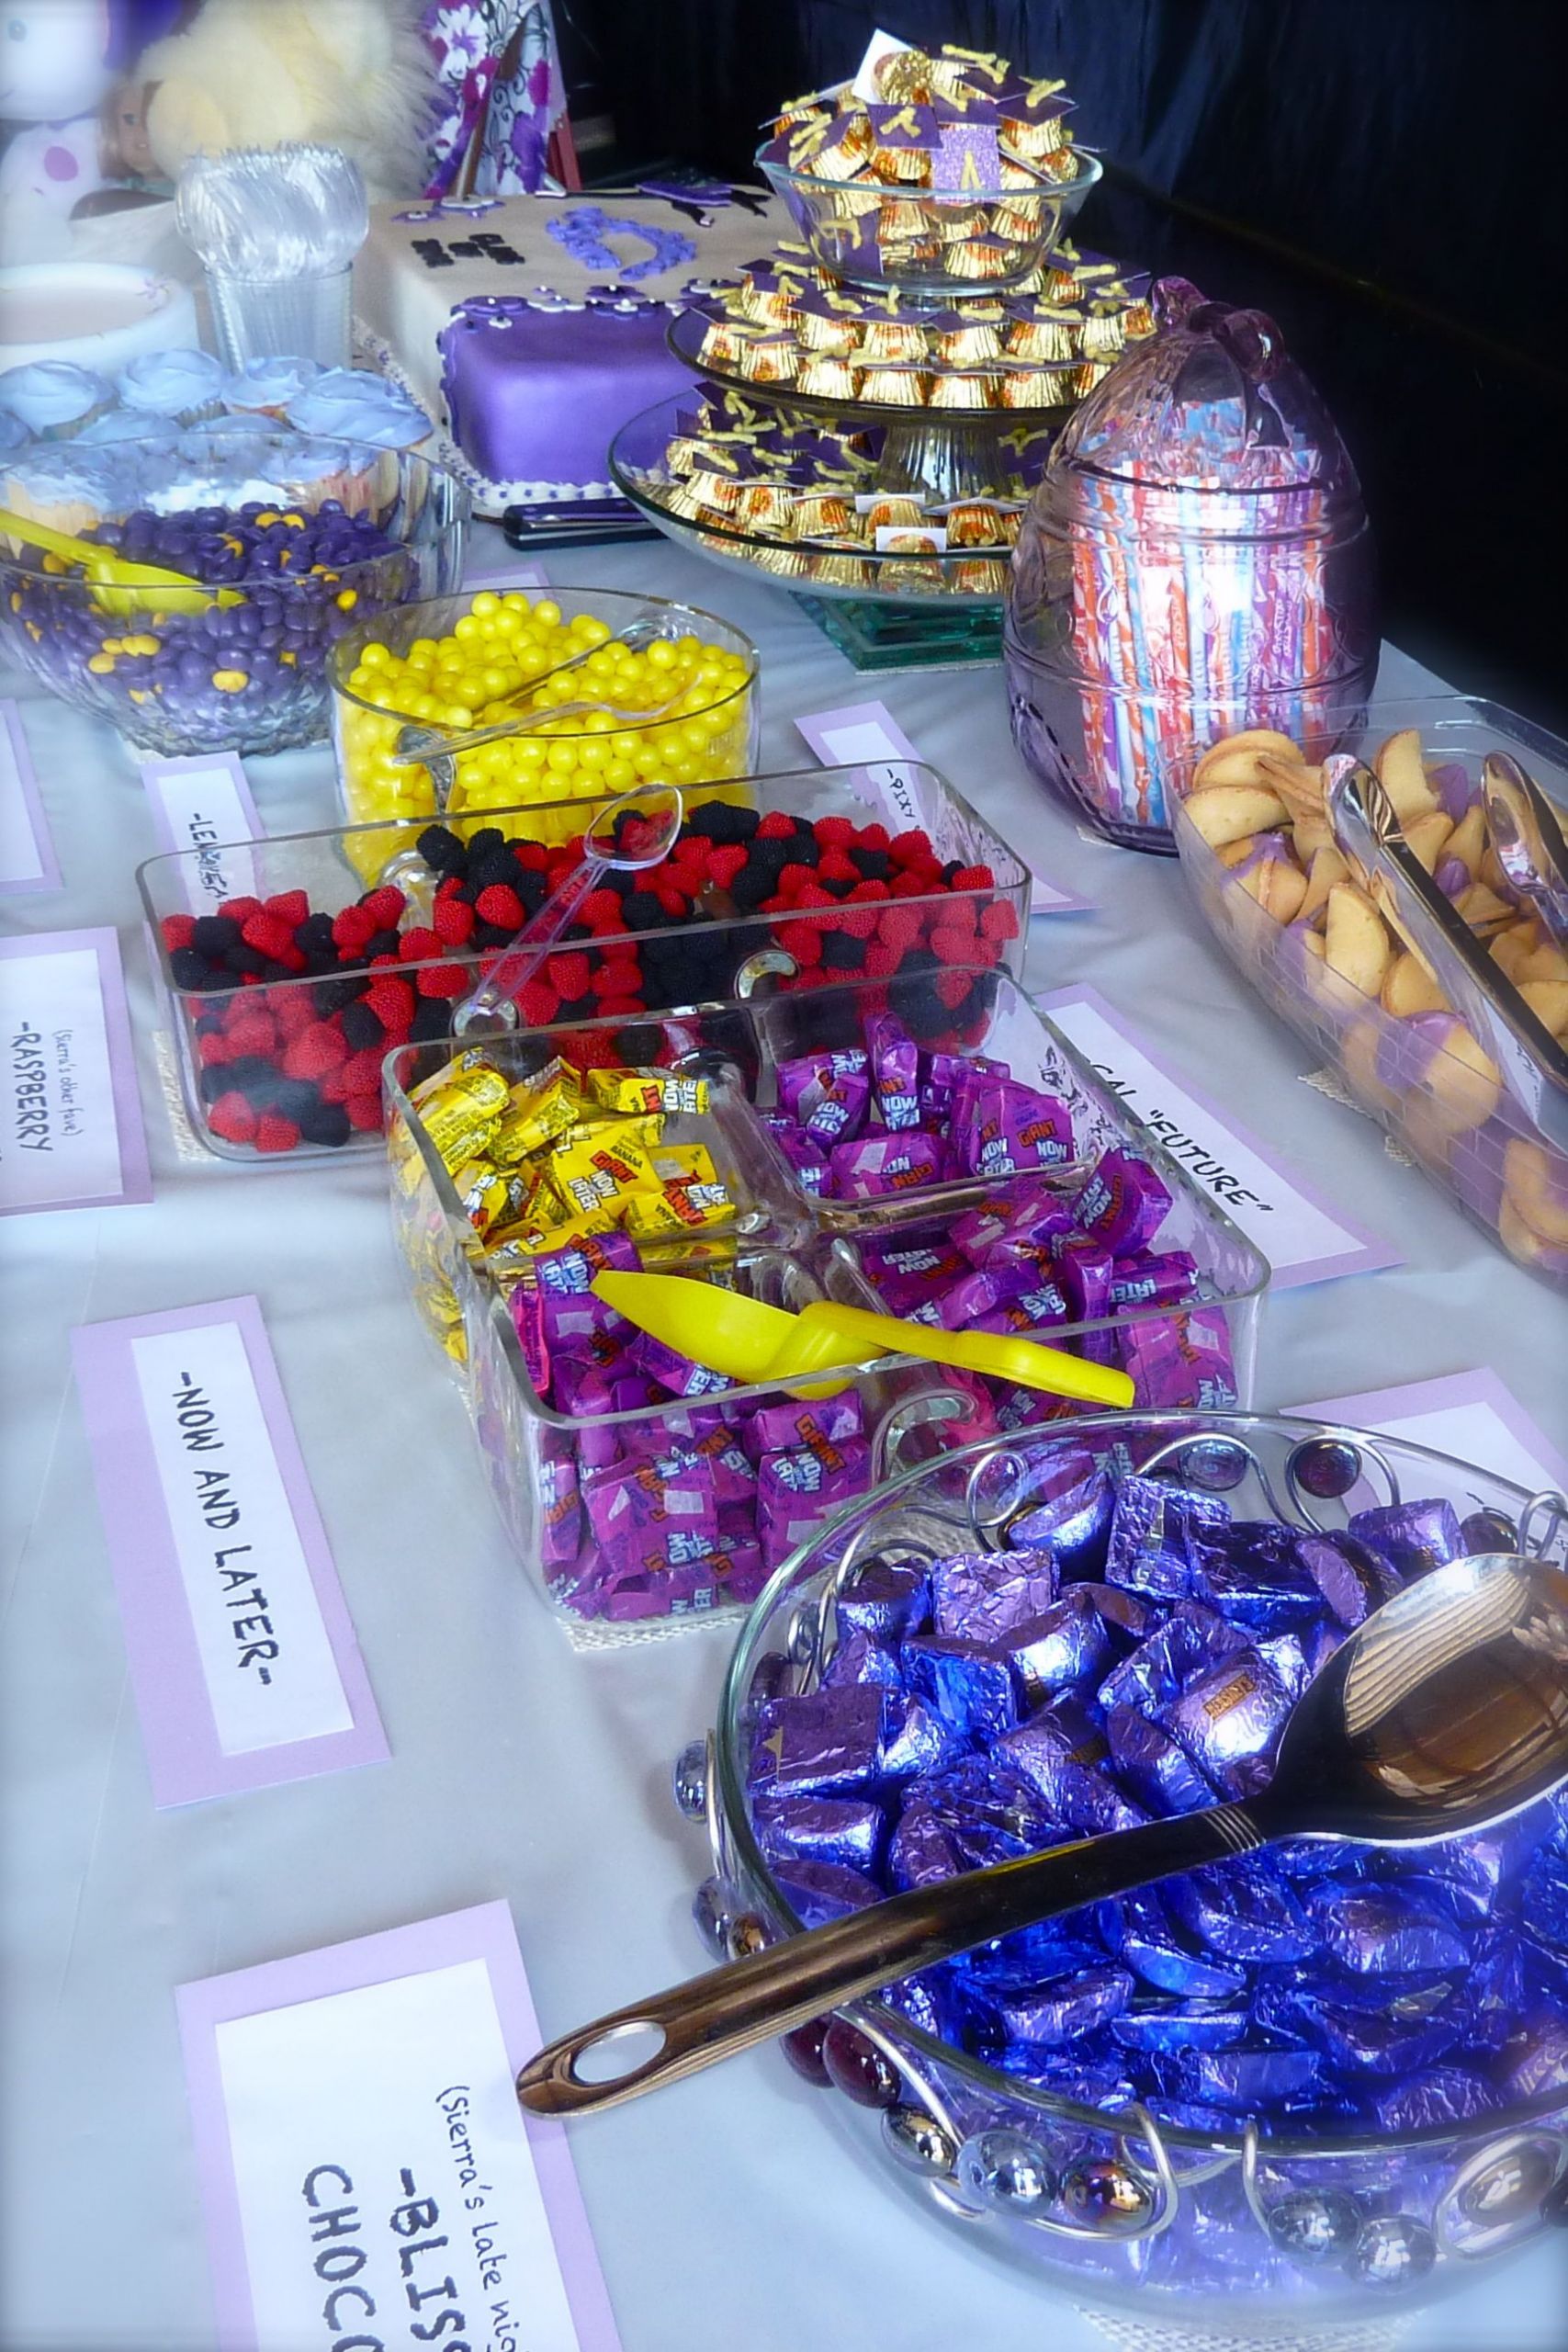 Candy Buffet Ideas For Graduation Party
 Grad party candy table